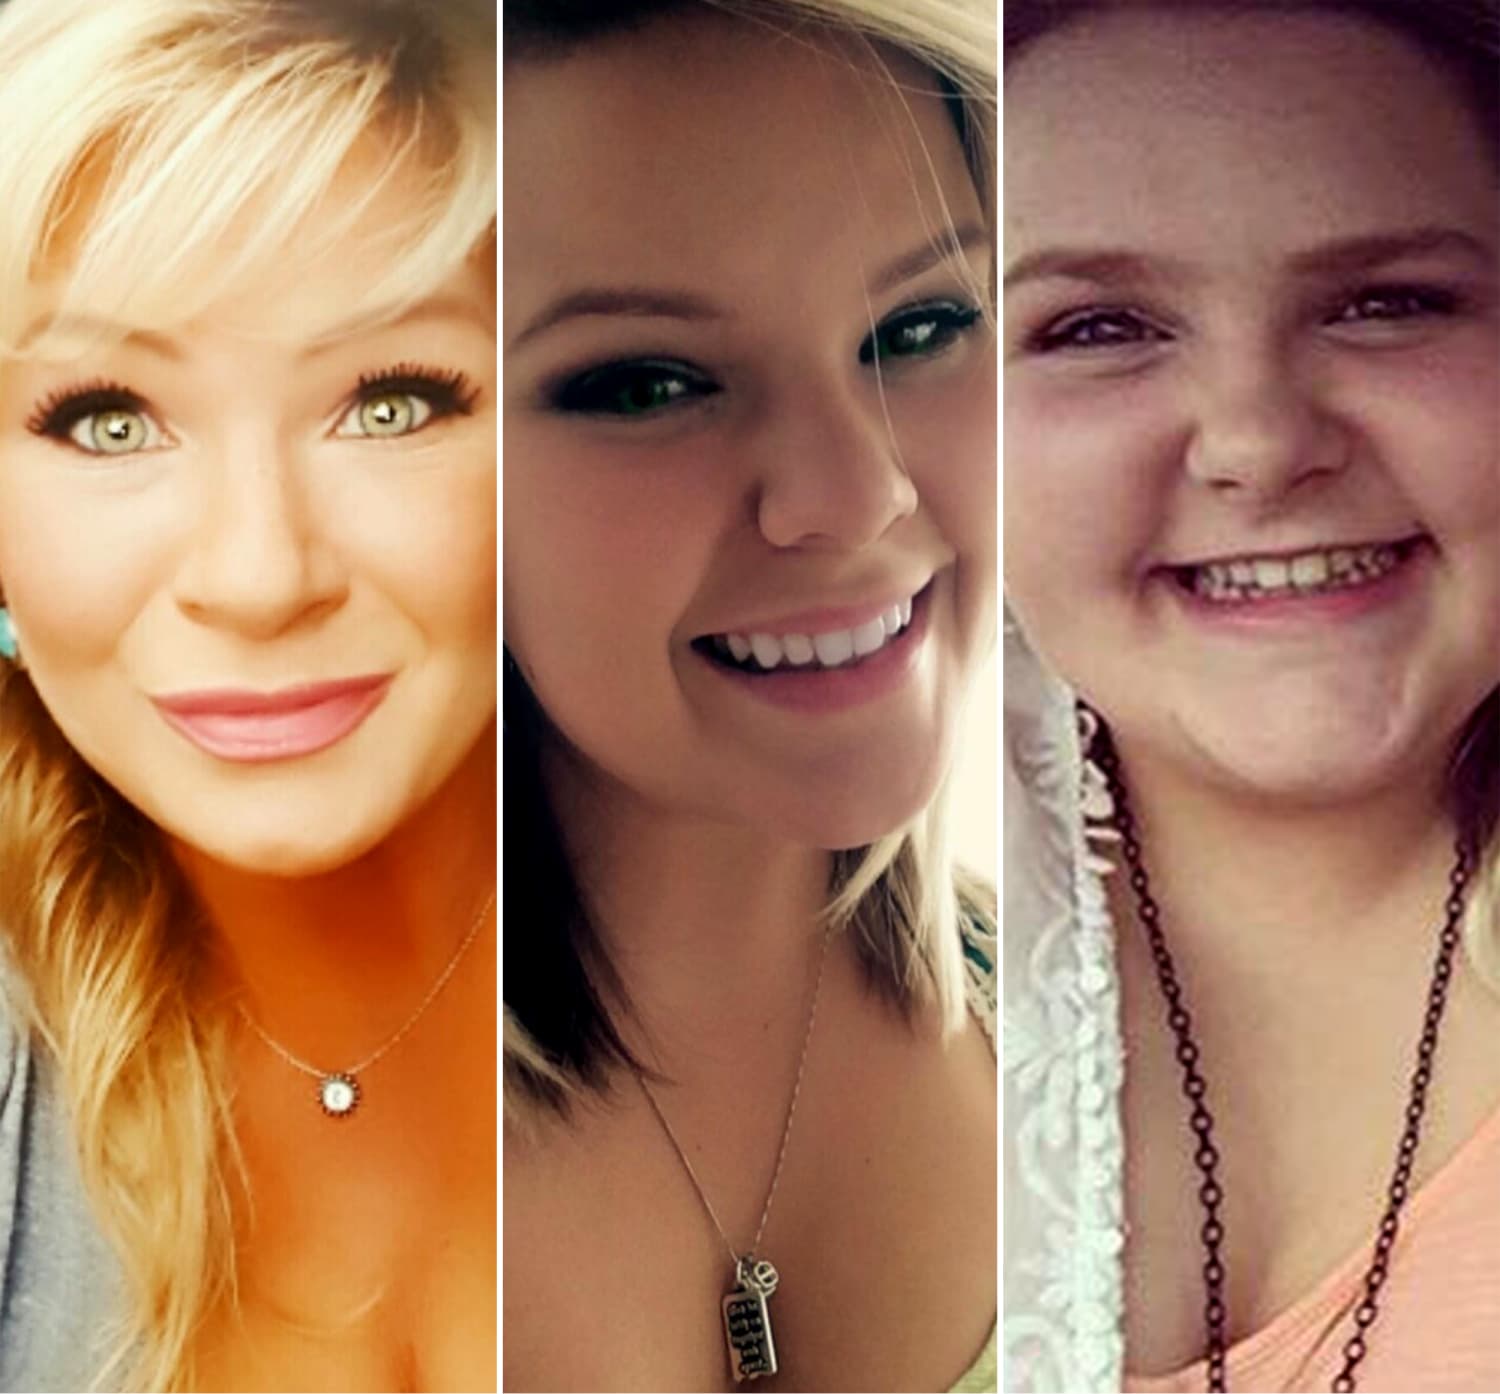 texas-mom-who-killed-daughters-wanted-husband-to-suffer-sheriff